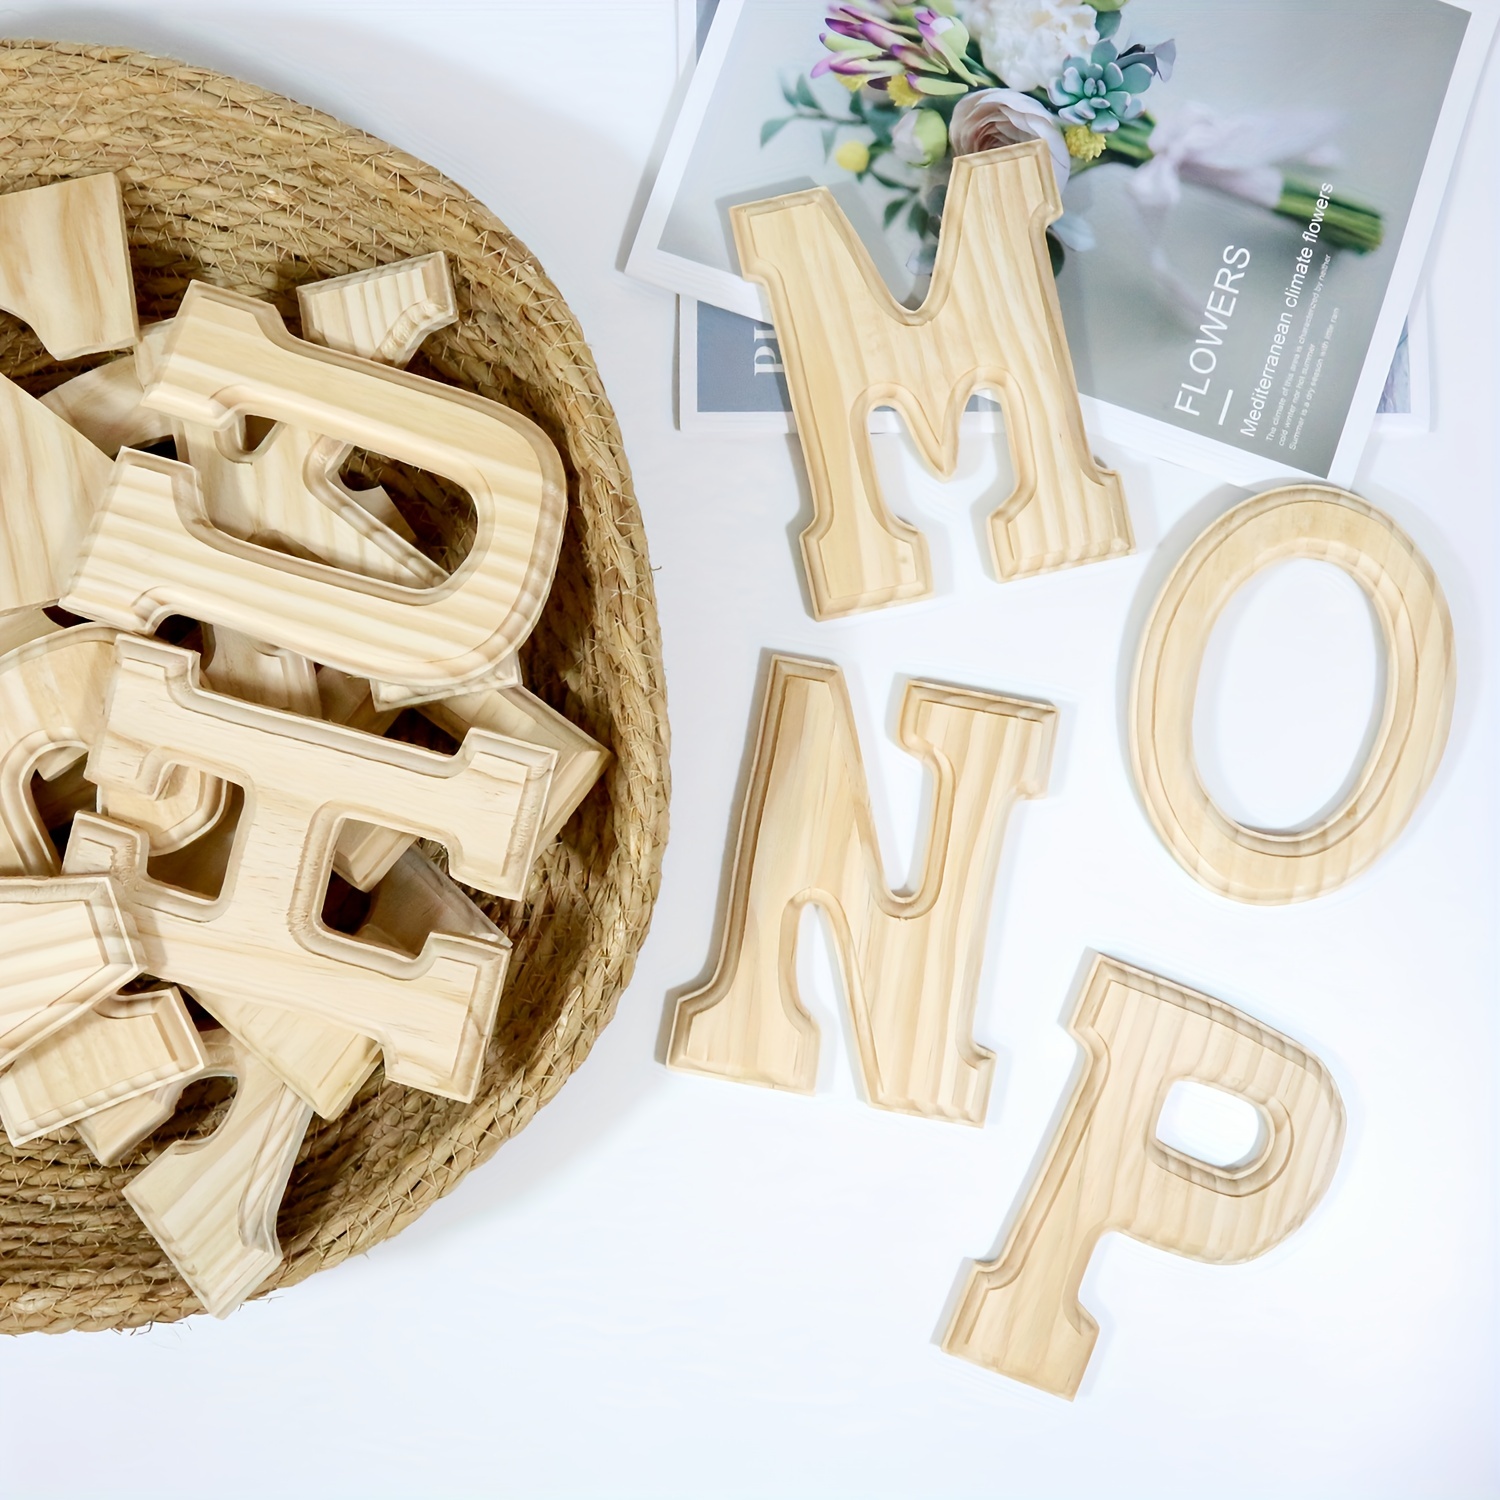 3 Wooden Letters - 78 Pcs Wood Alphabet Letters for Crafts Wood Letters  Sign Decoration Unfinished Wood Letters for Letter Board/Wall